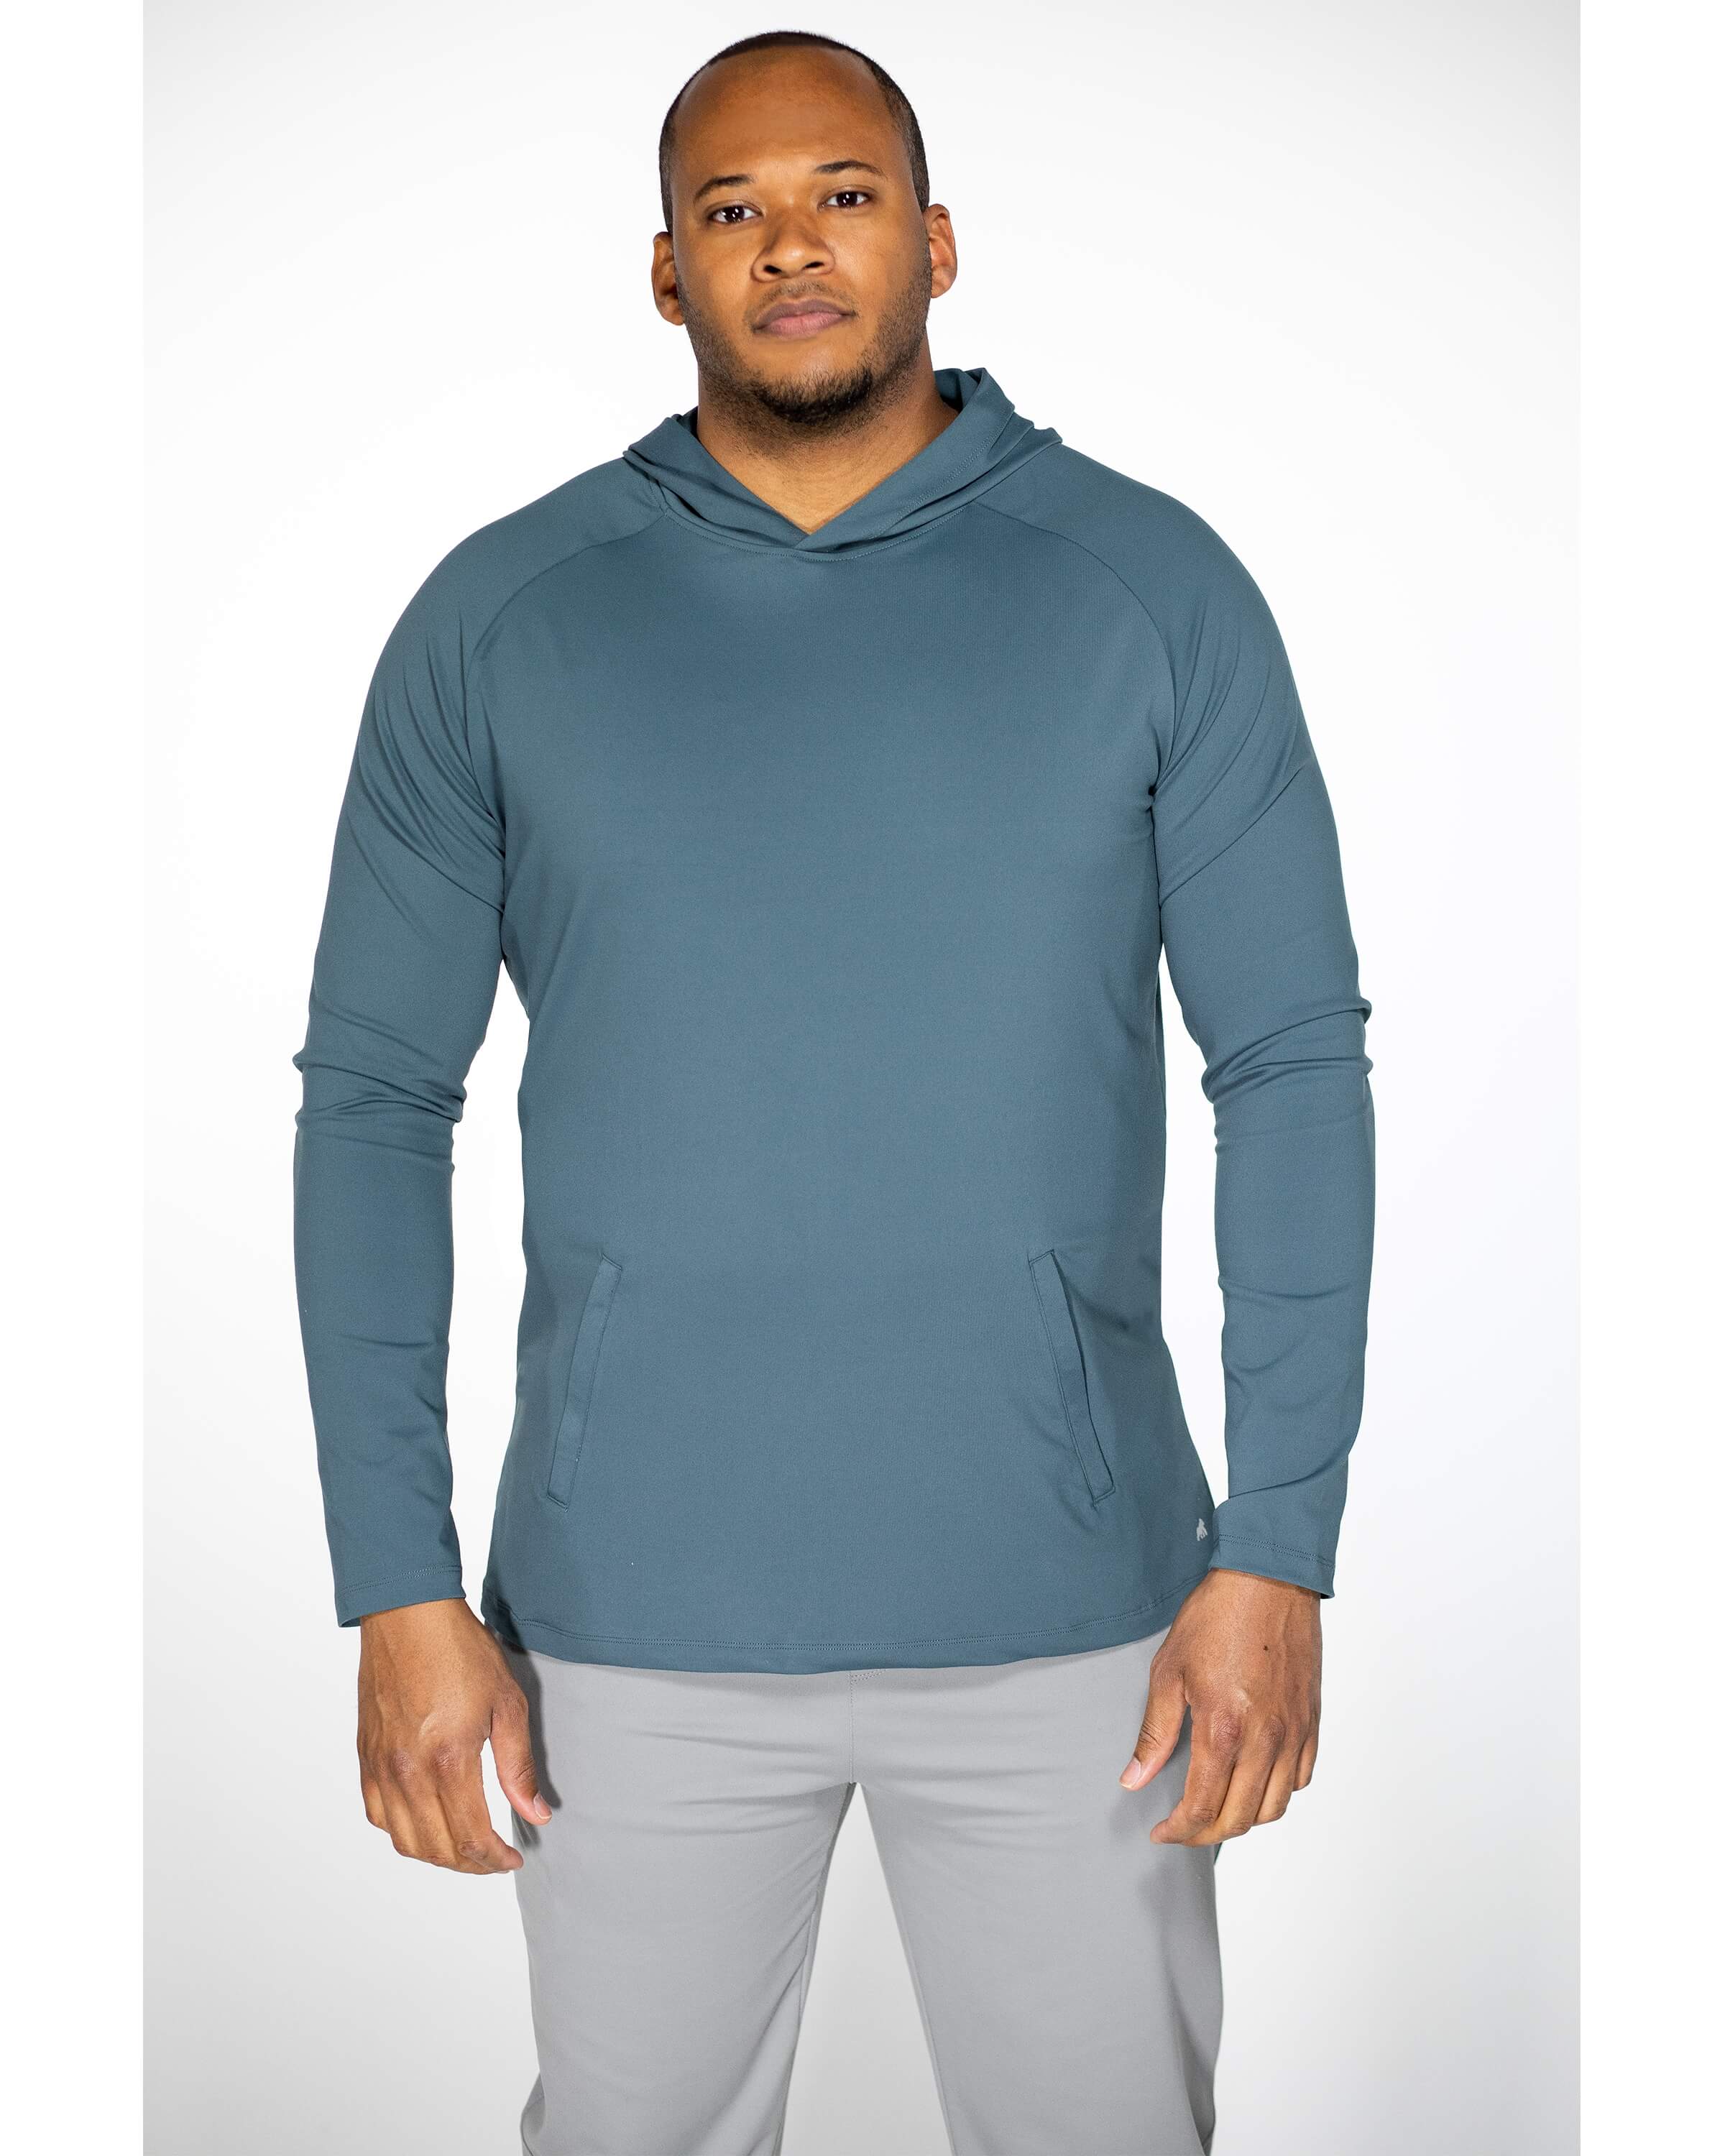 Long-Sleeve Jersey Pullover Hoodie for Men